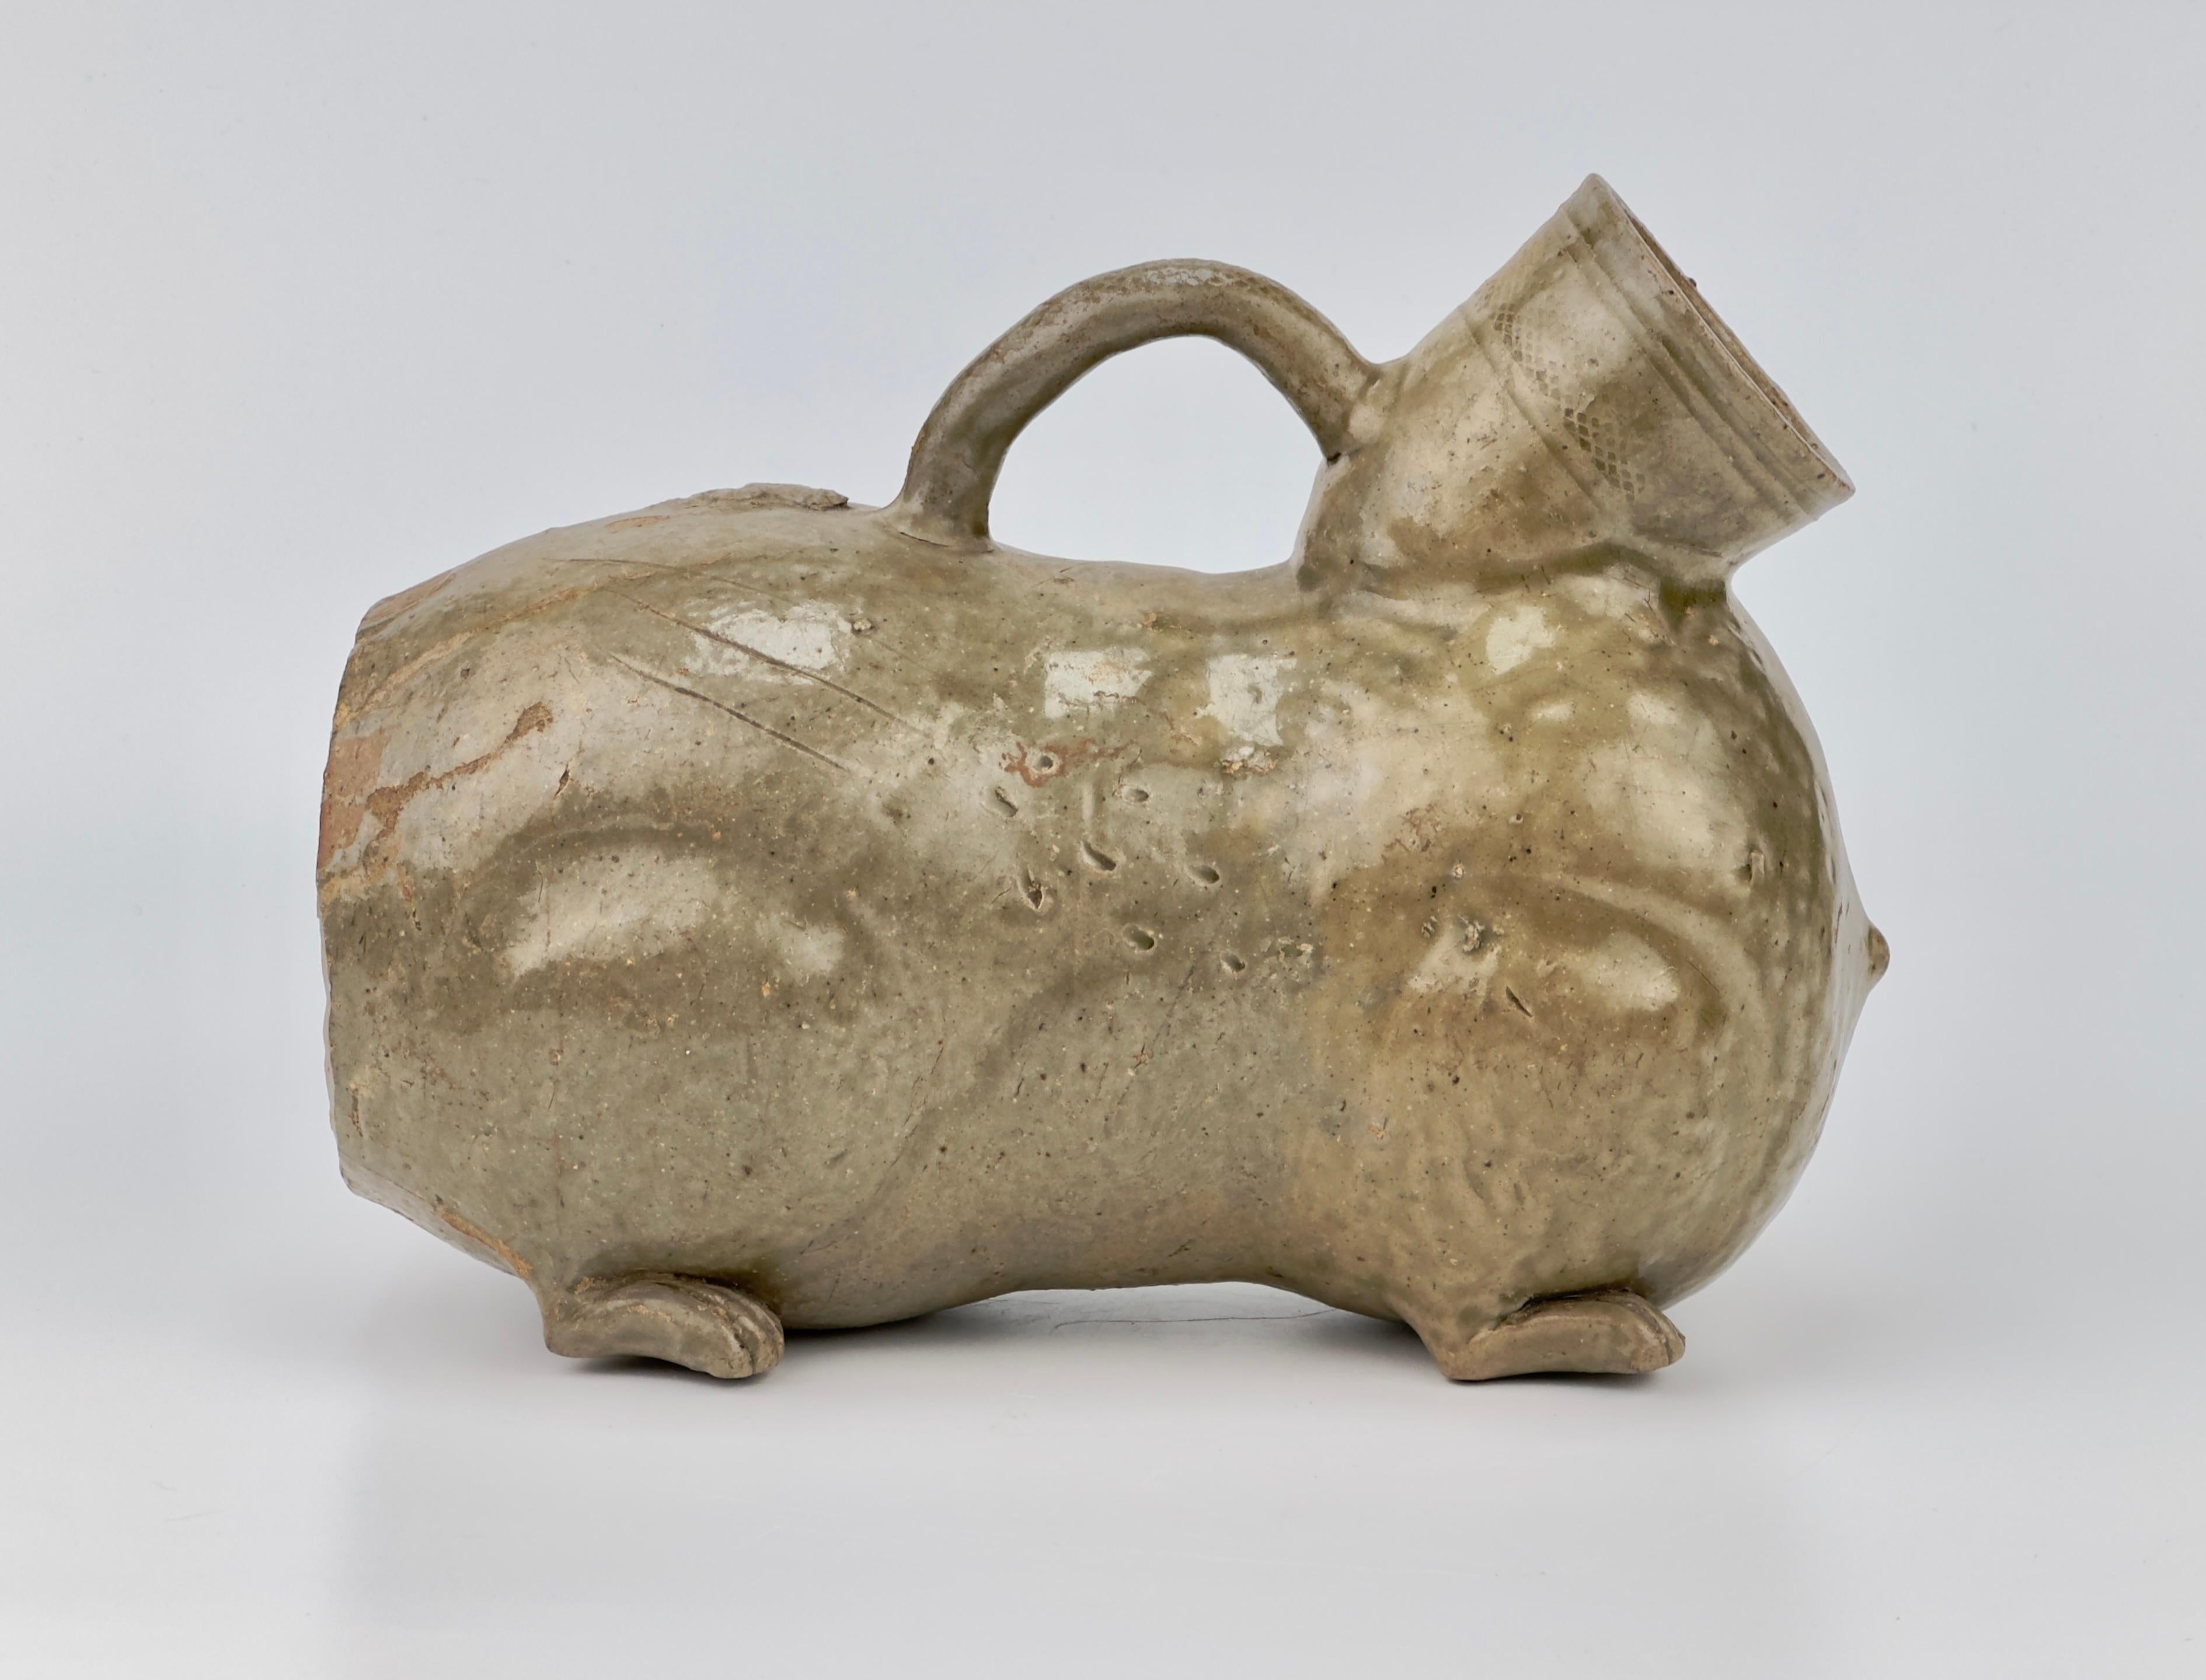 This vessel is well-modeled as a recumbent winged lion with detailed decorative elements. It features a grimacing face with large protruberant eyes under heavy brows and a gaping mouth, which forms a large aperture. The piece has a tail that arches